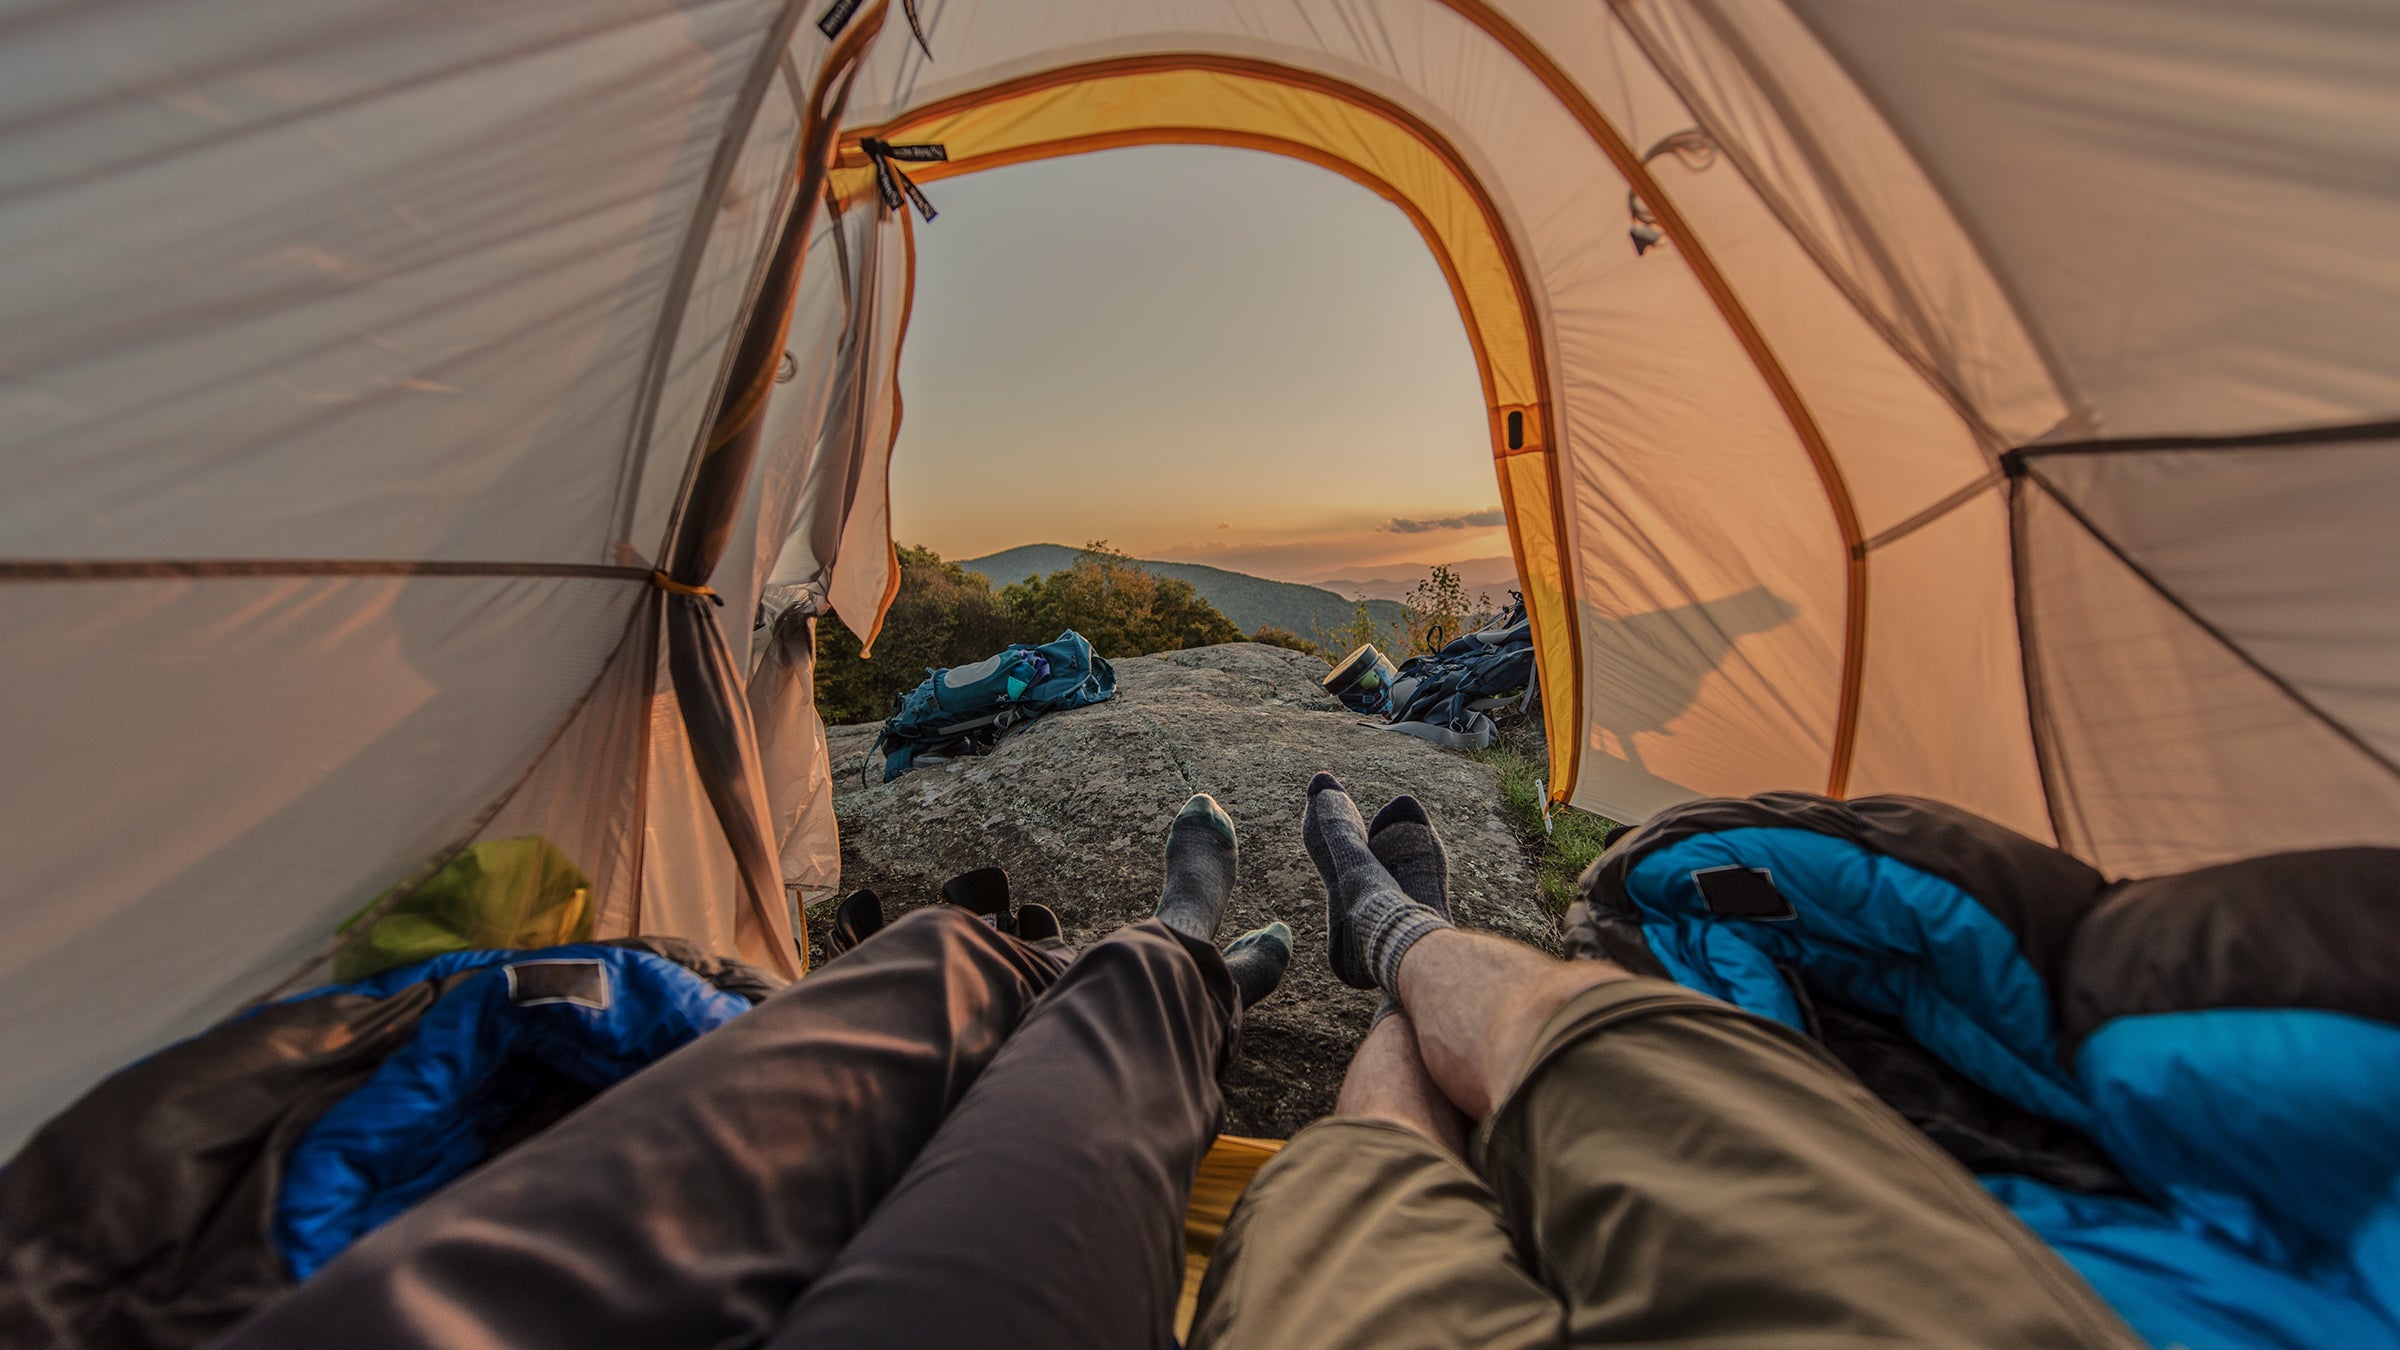 https://www.xvsy.com.au/wp-content/uploads/2022/01/Two-people-sleeping-in-a-two-person-tent.jpg